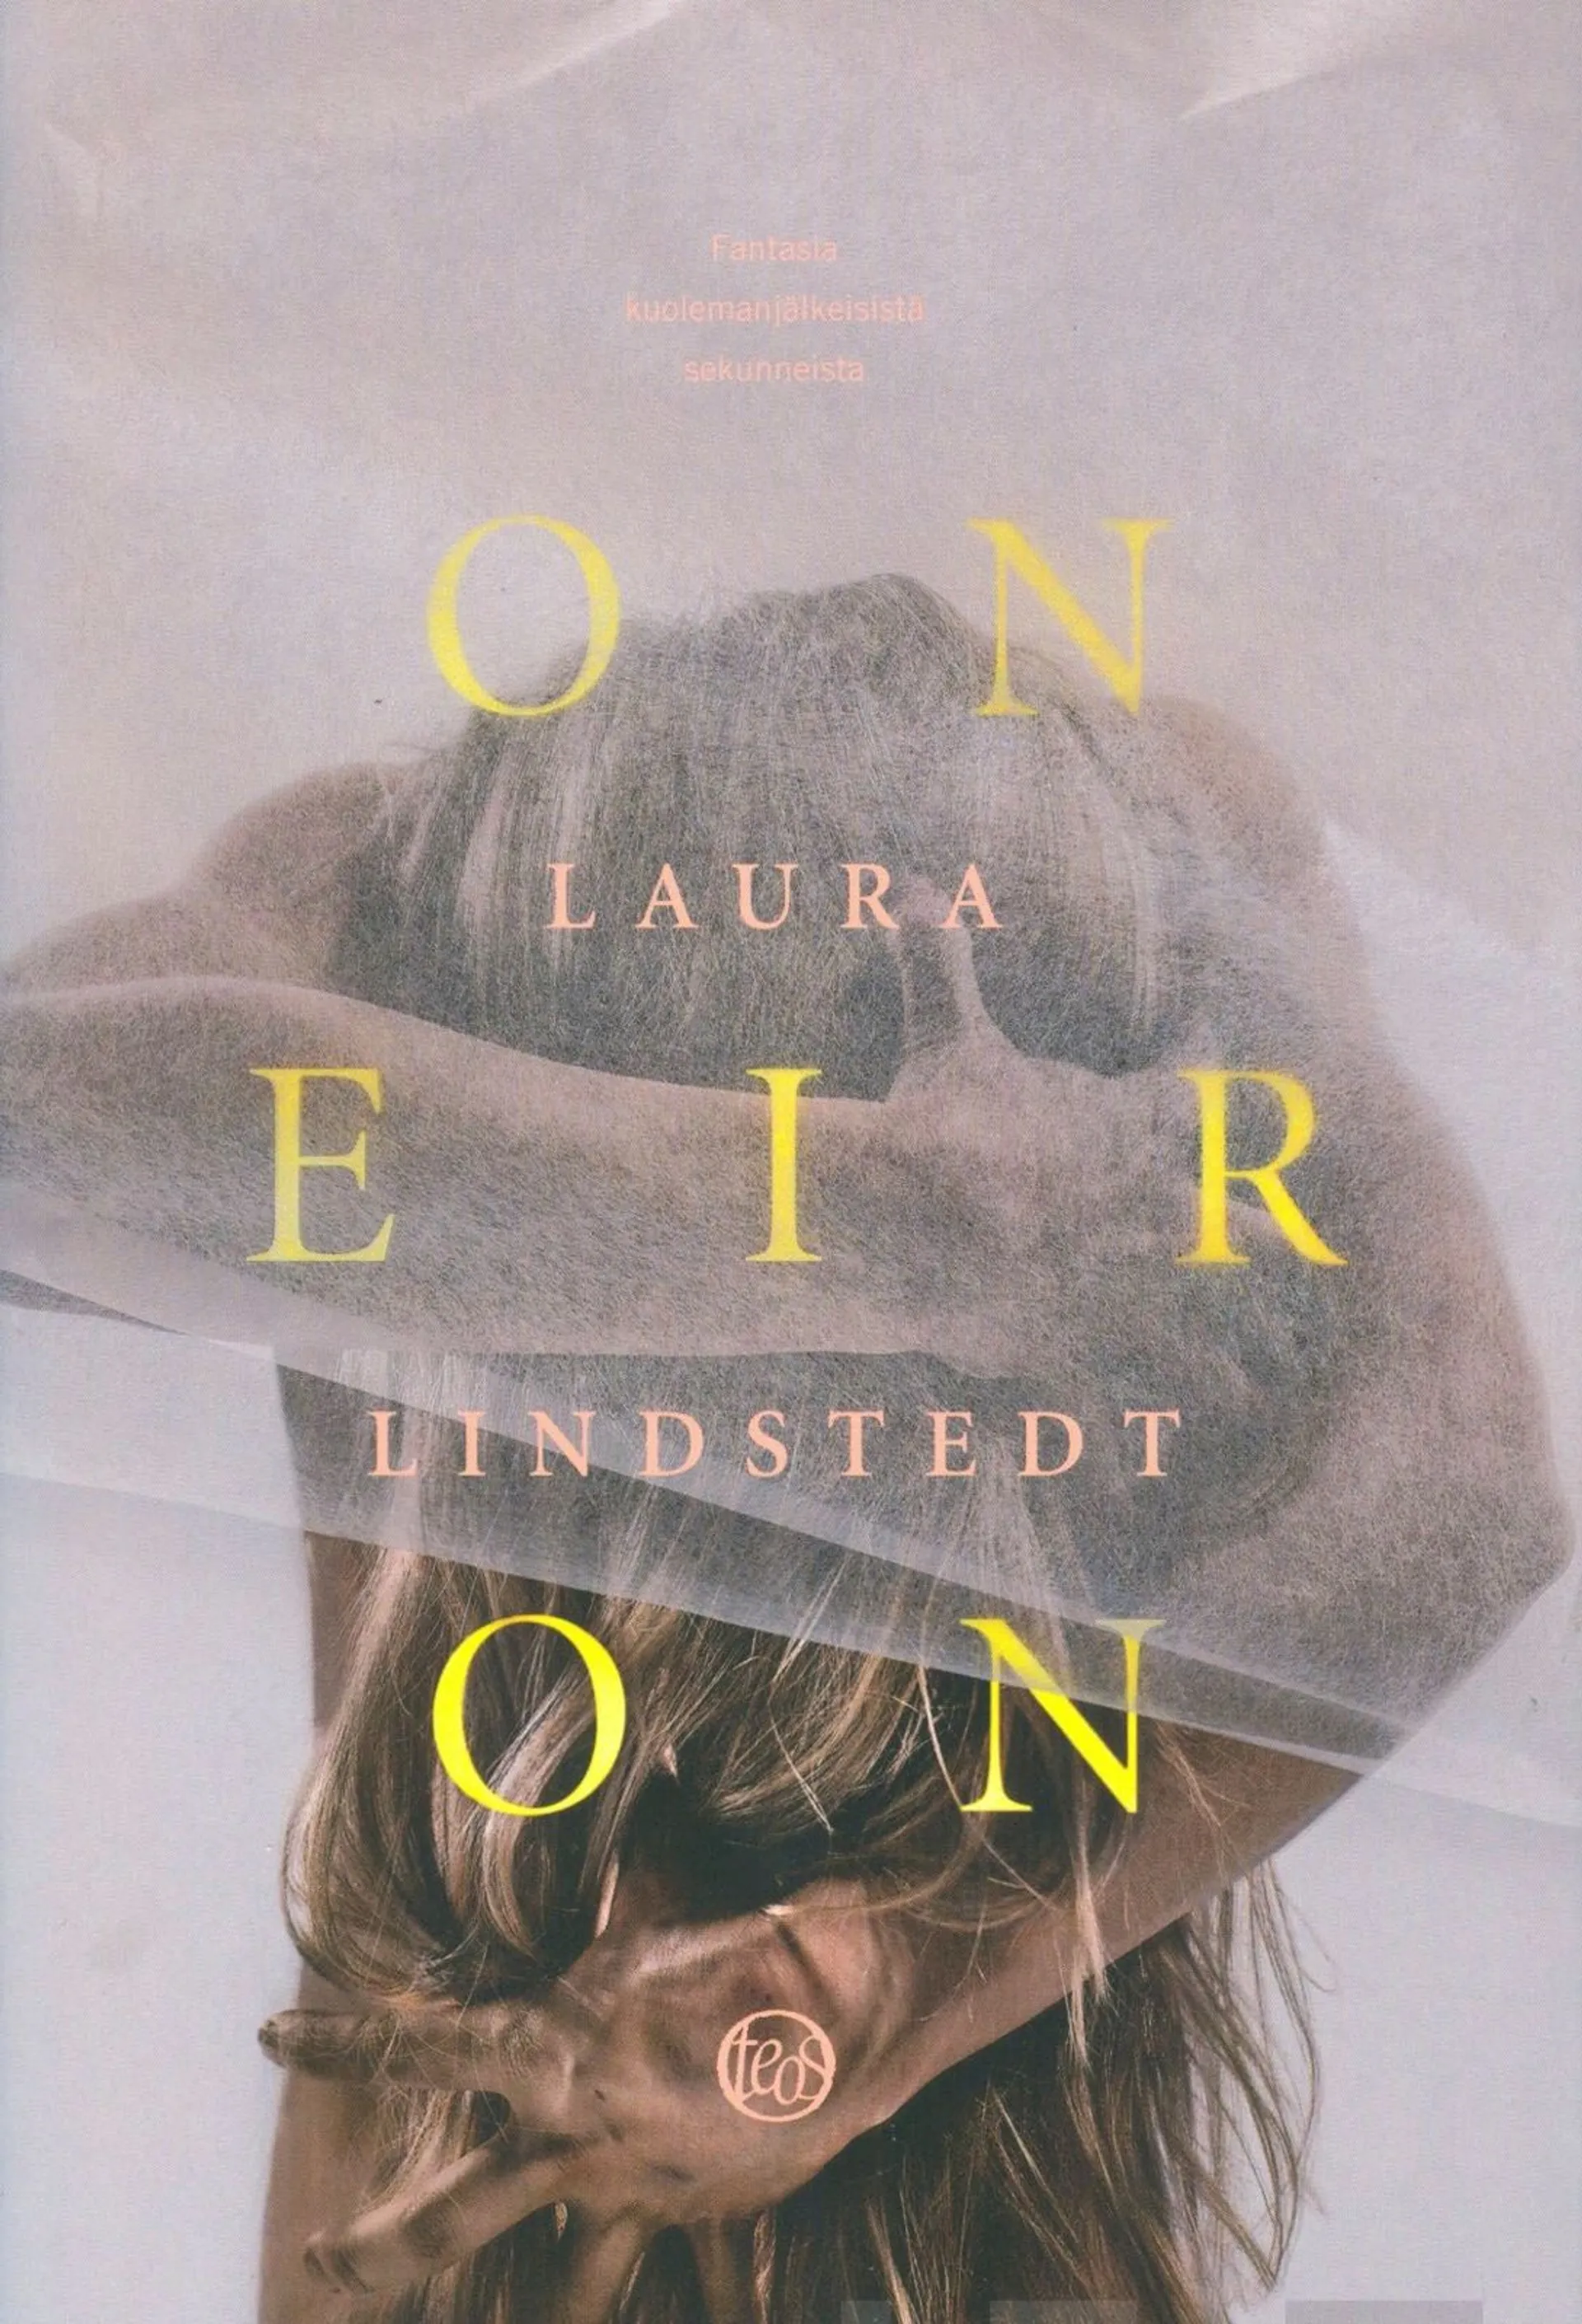 Lindstedt, Oneiron